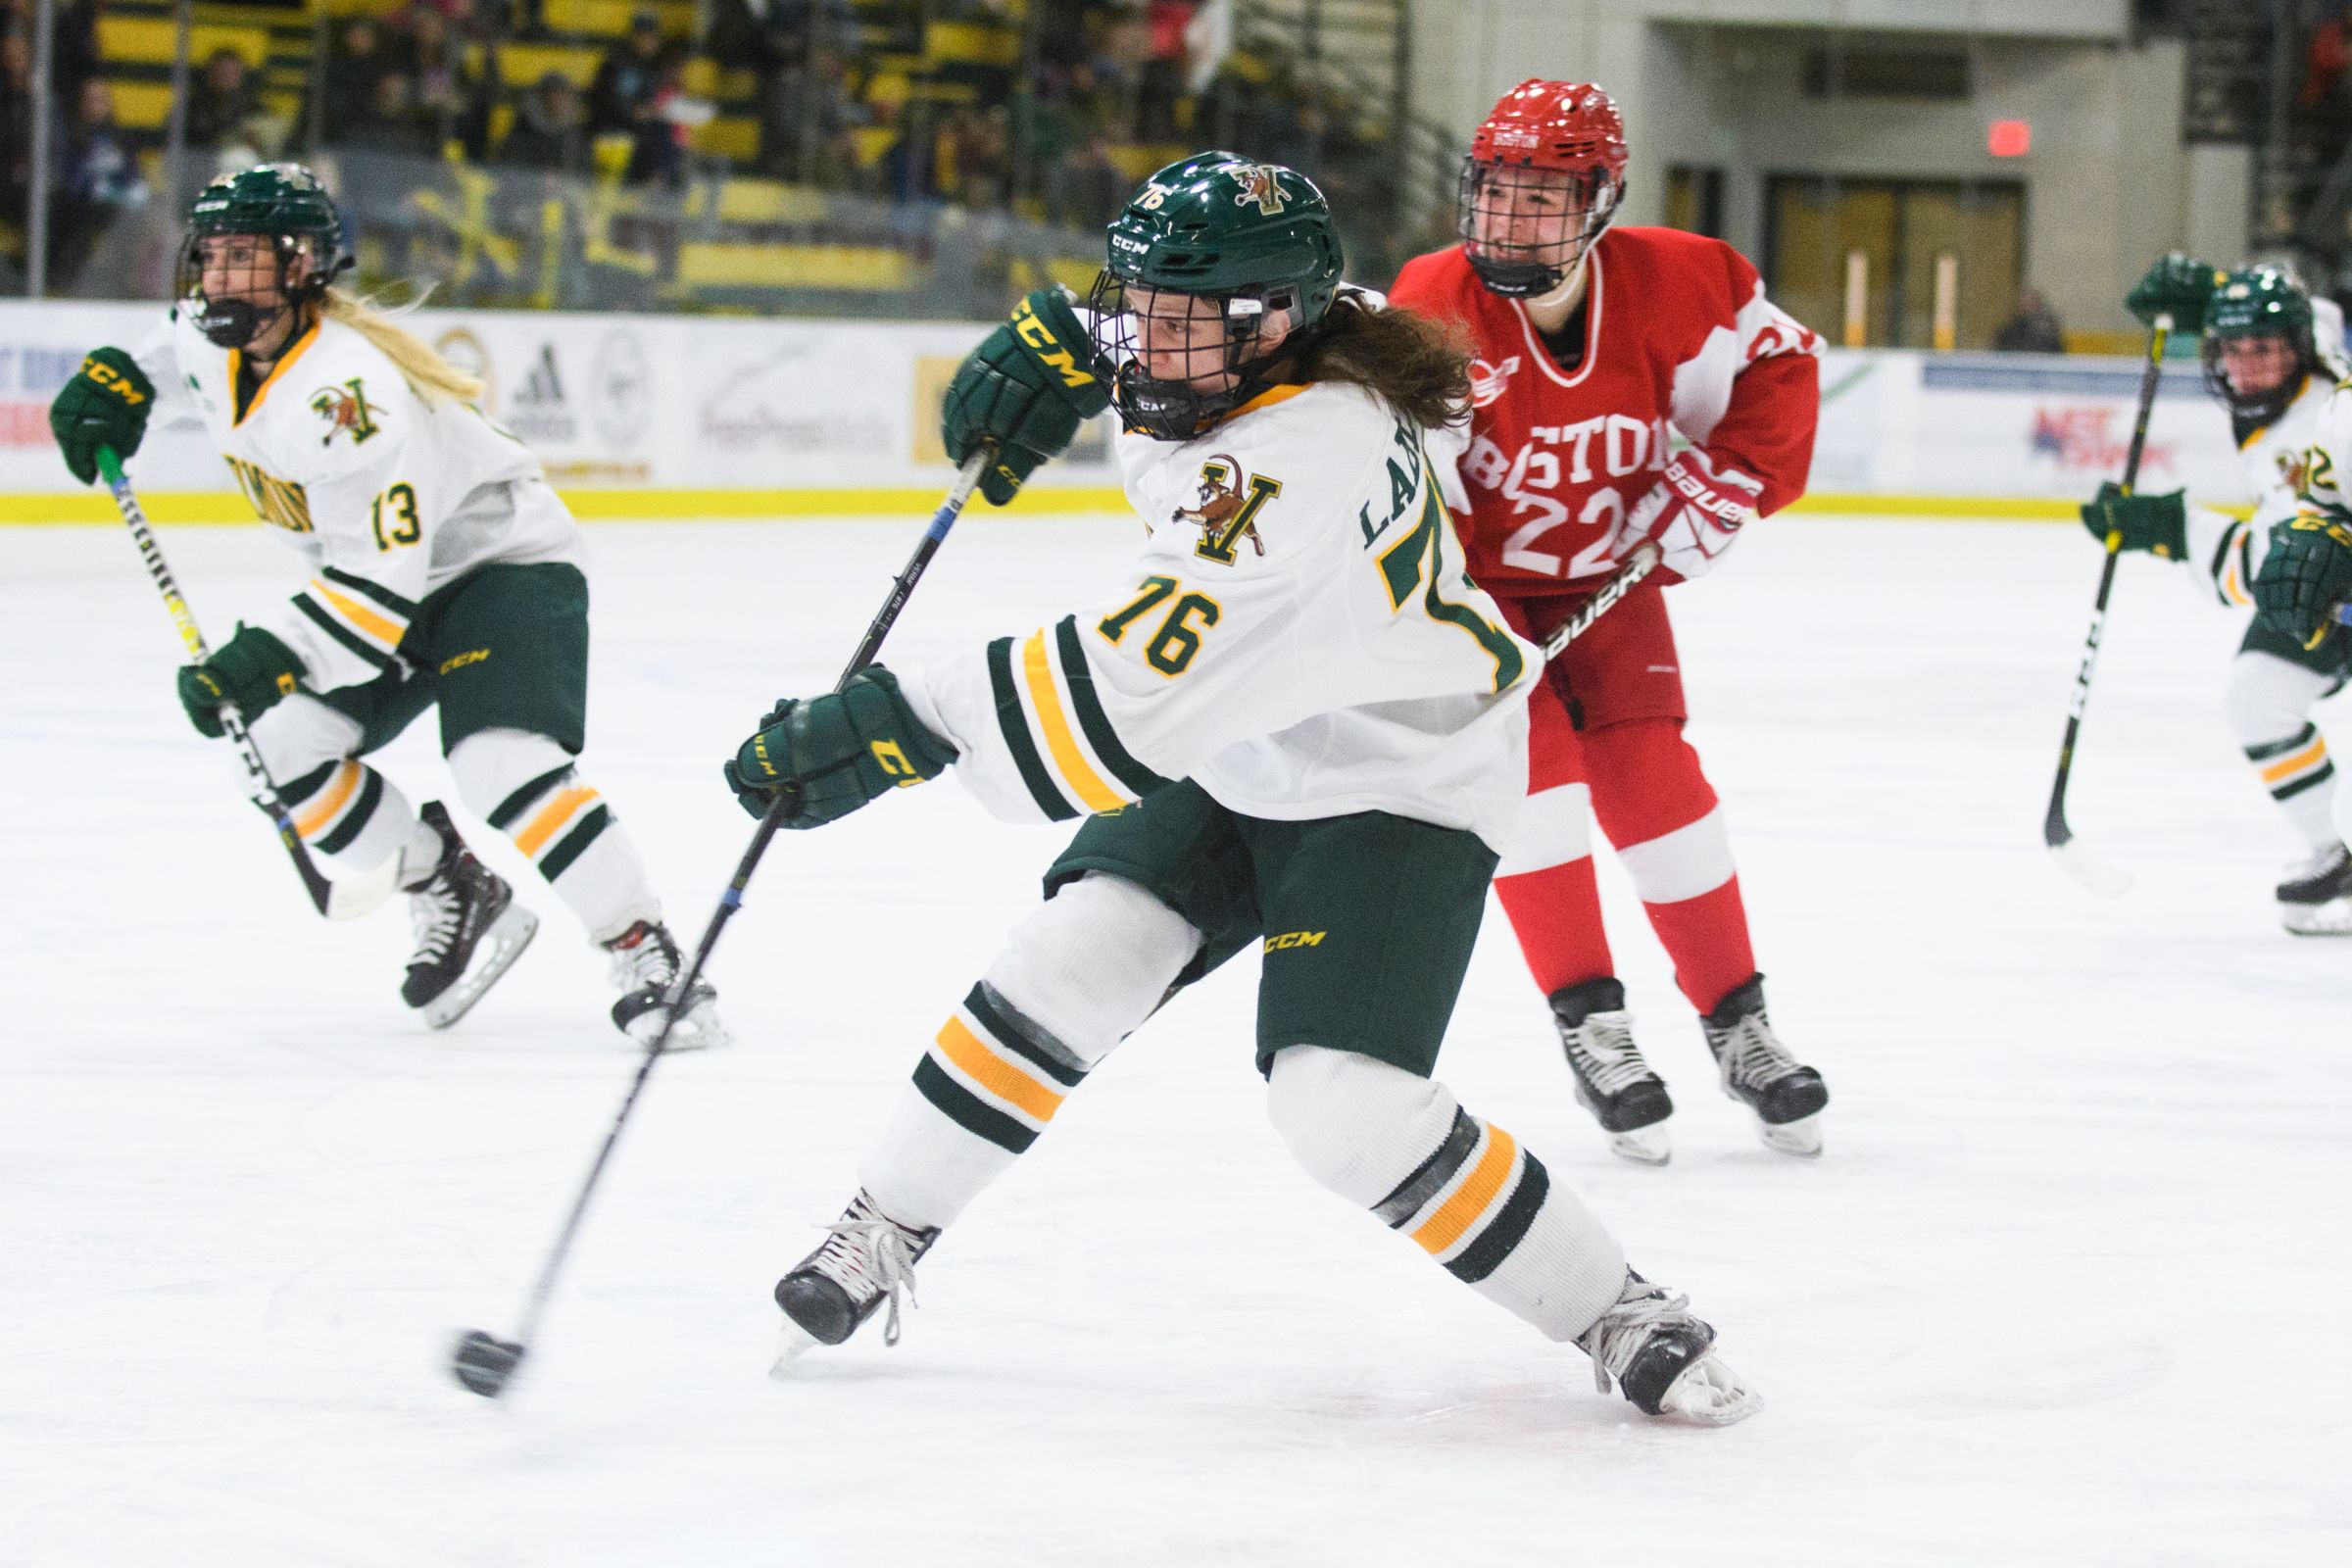 Minnesota State at Sacred Heart Live Stream Womens Hockey - How to Watch and Stream Major League and College Sports